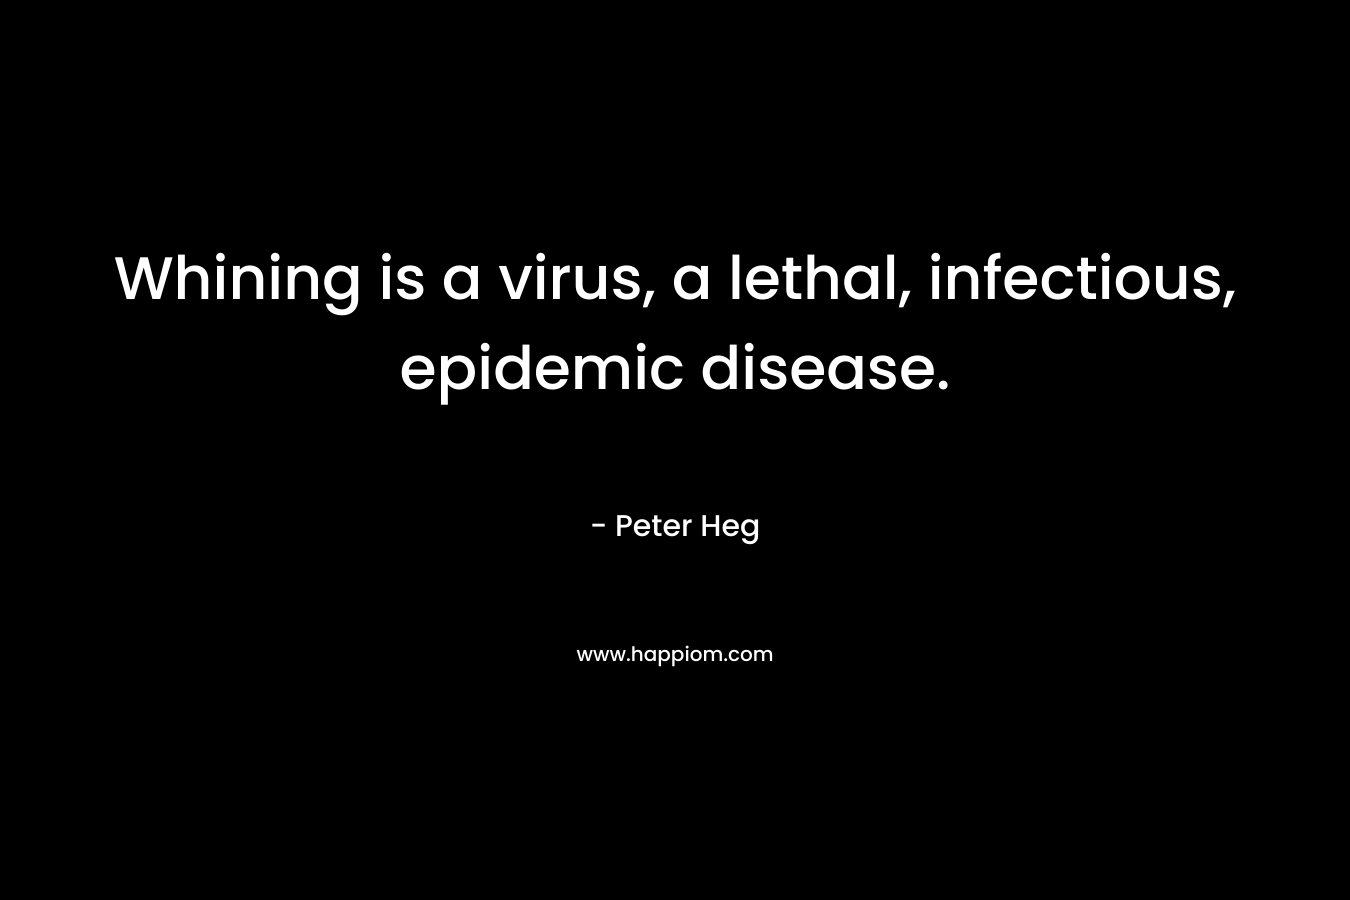 Whining is a virus, a lethal, infectious, epidemic disease. – Peter Heg